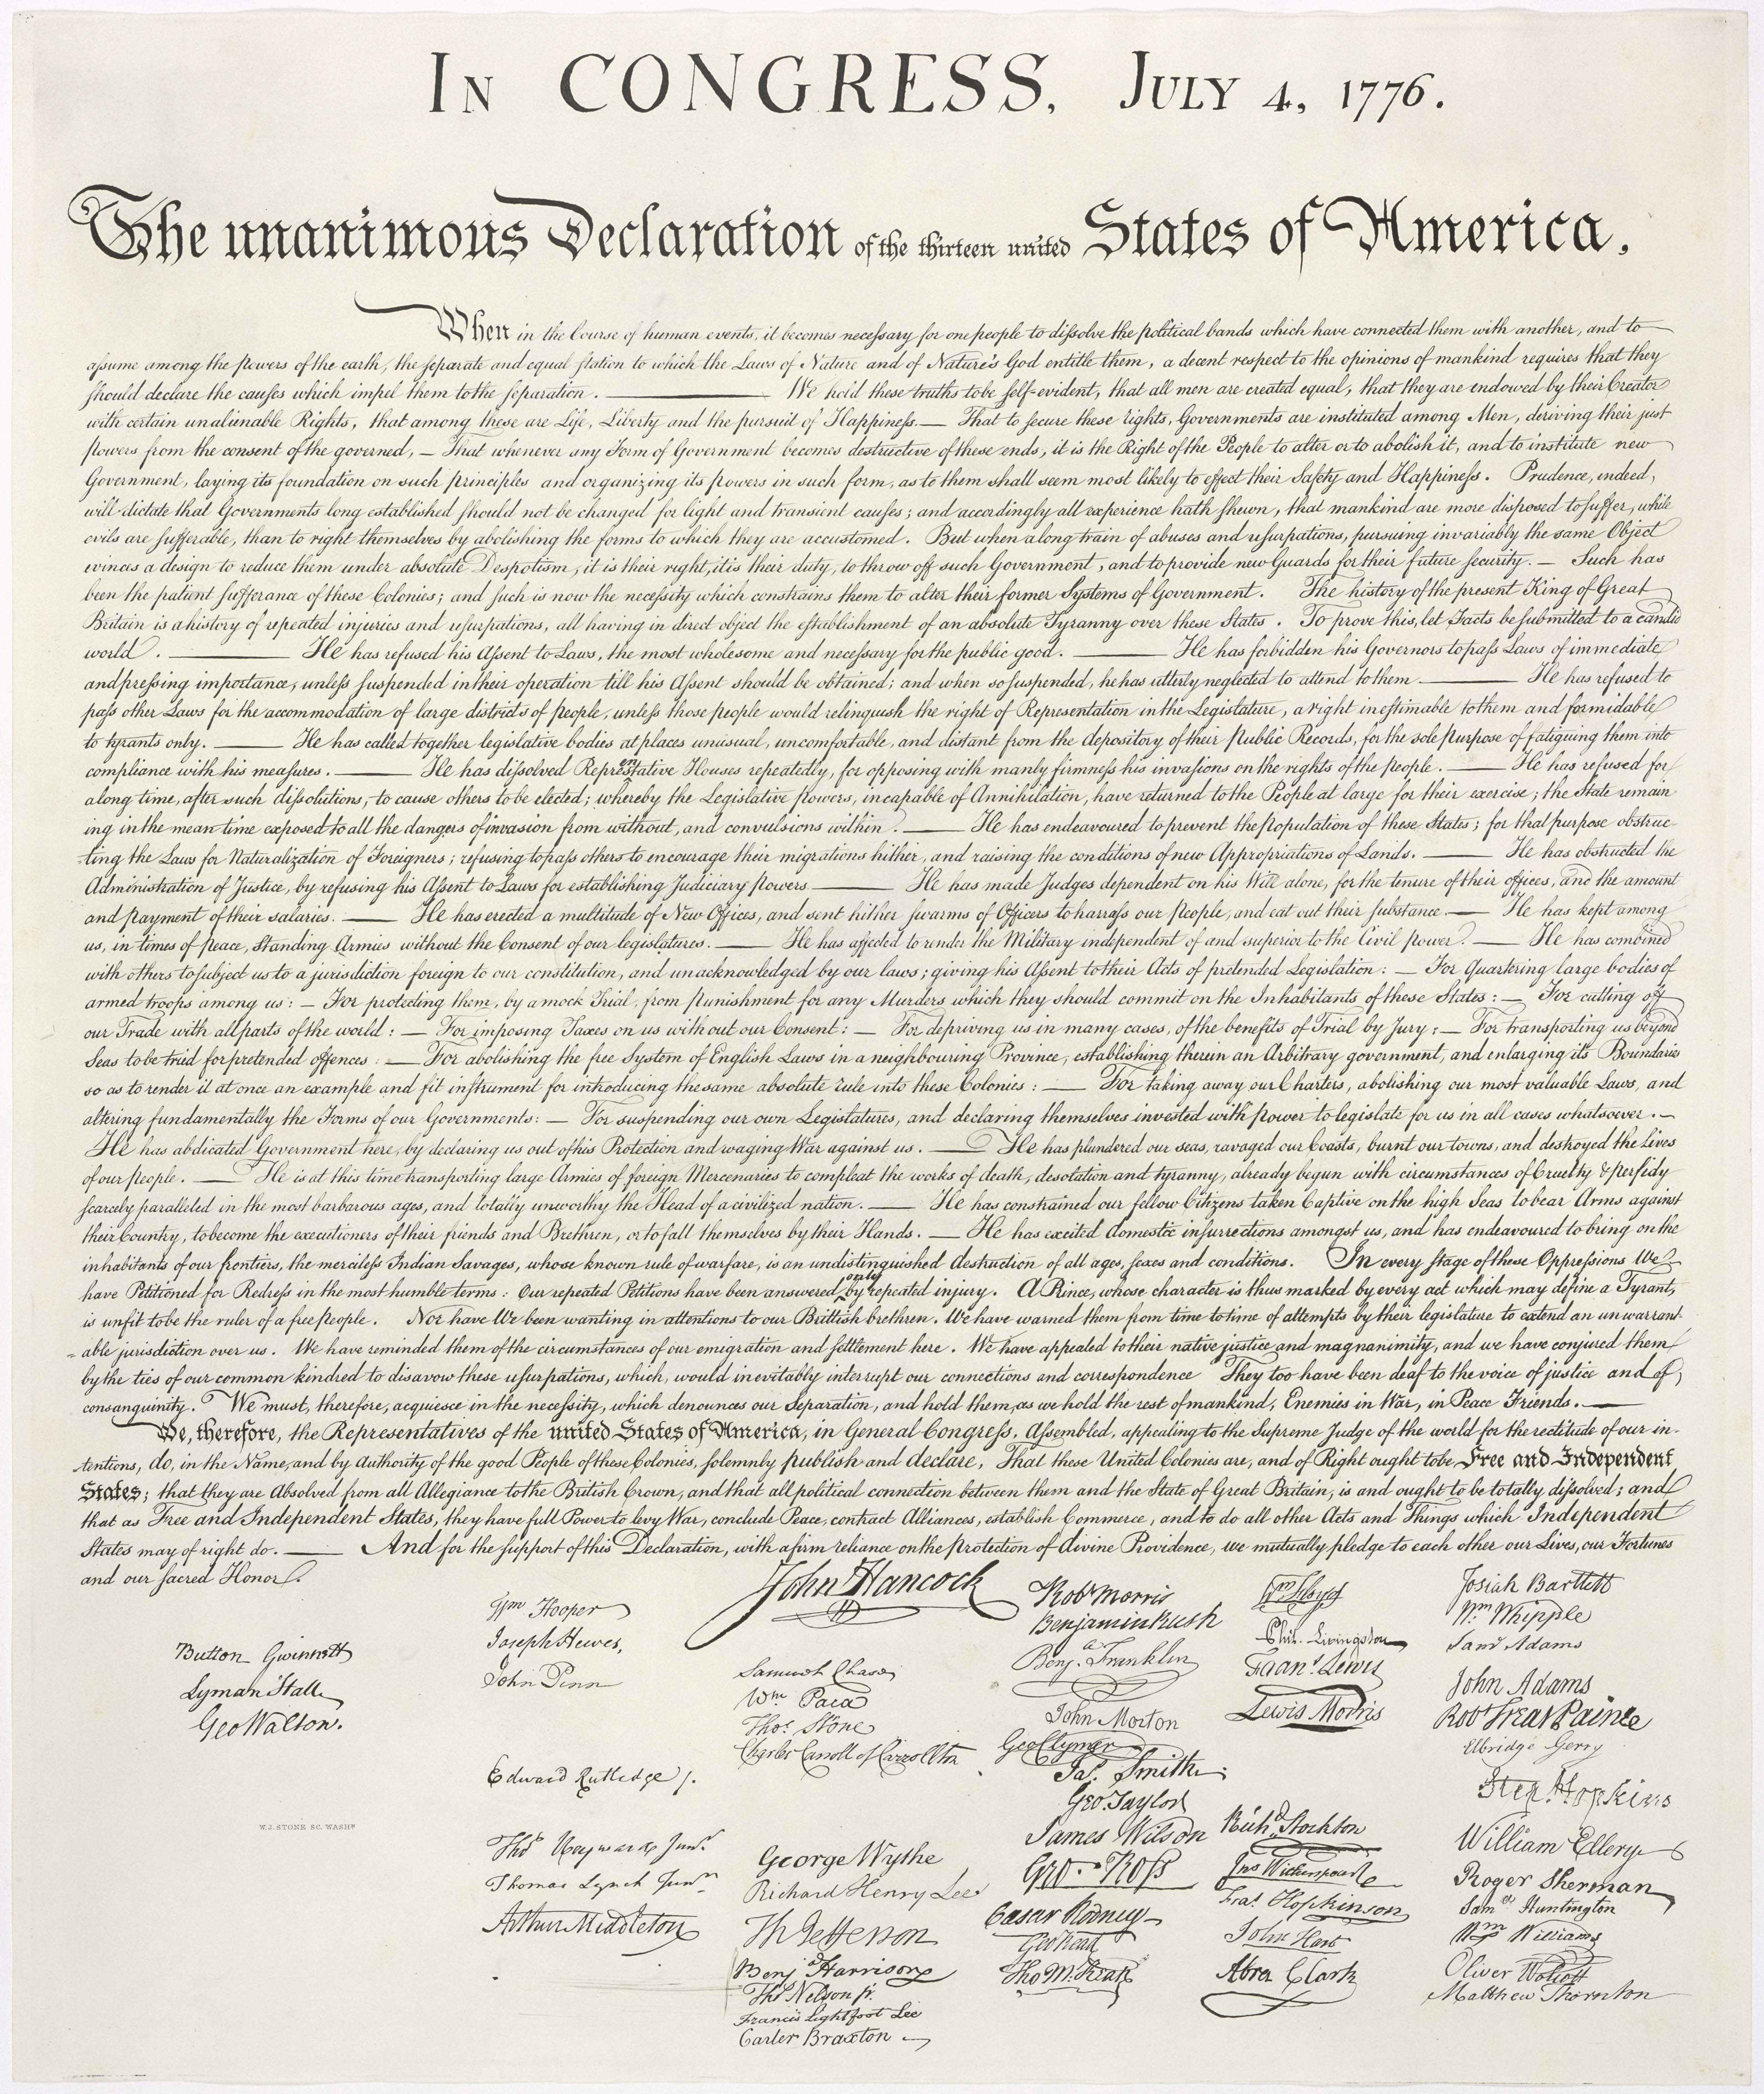 The original US Constitution text: A document that inspired the